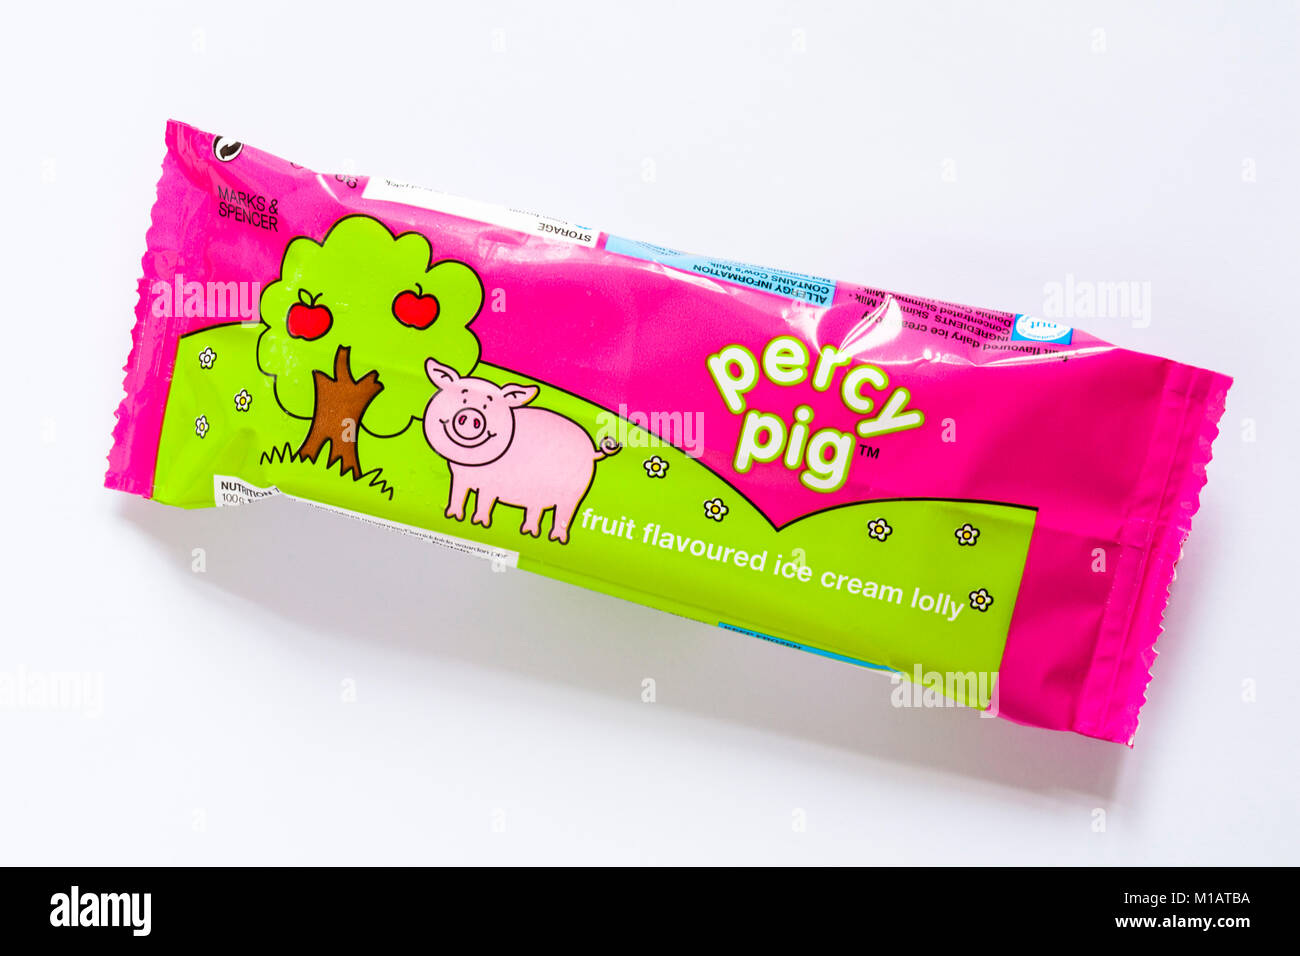 Percy Pig fruit flavoured ice cream lolly isolated on white background Stock Photo